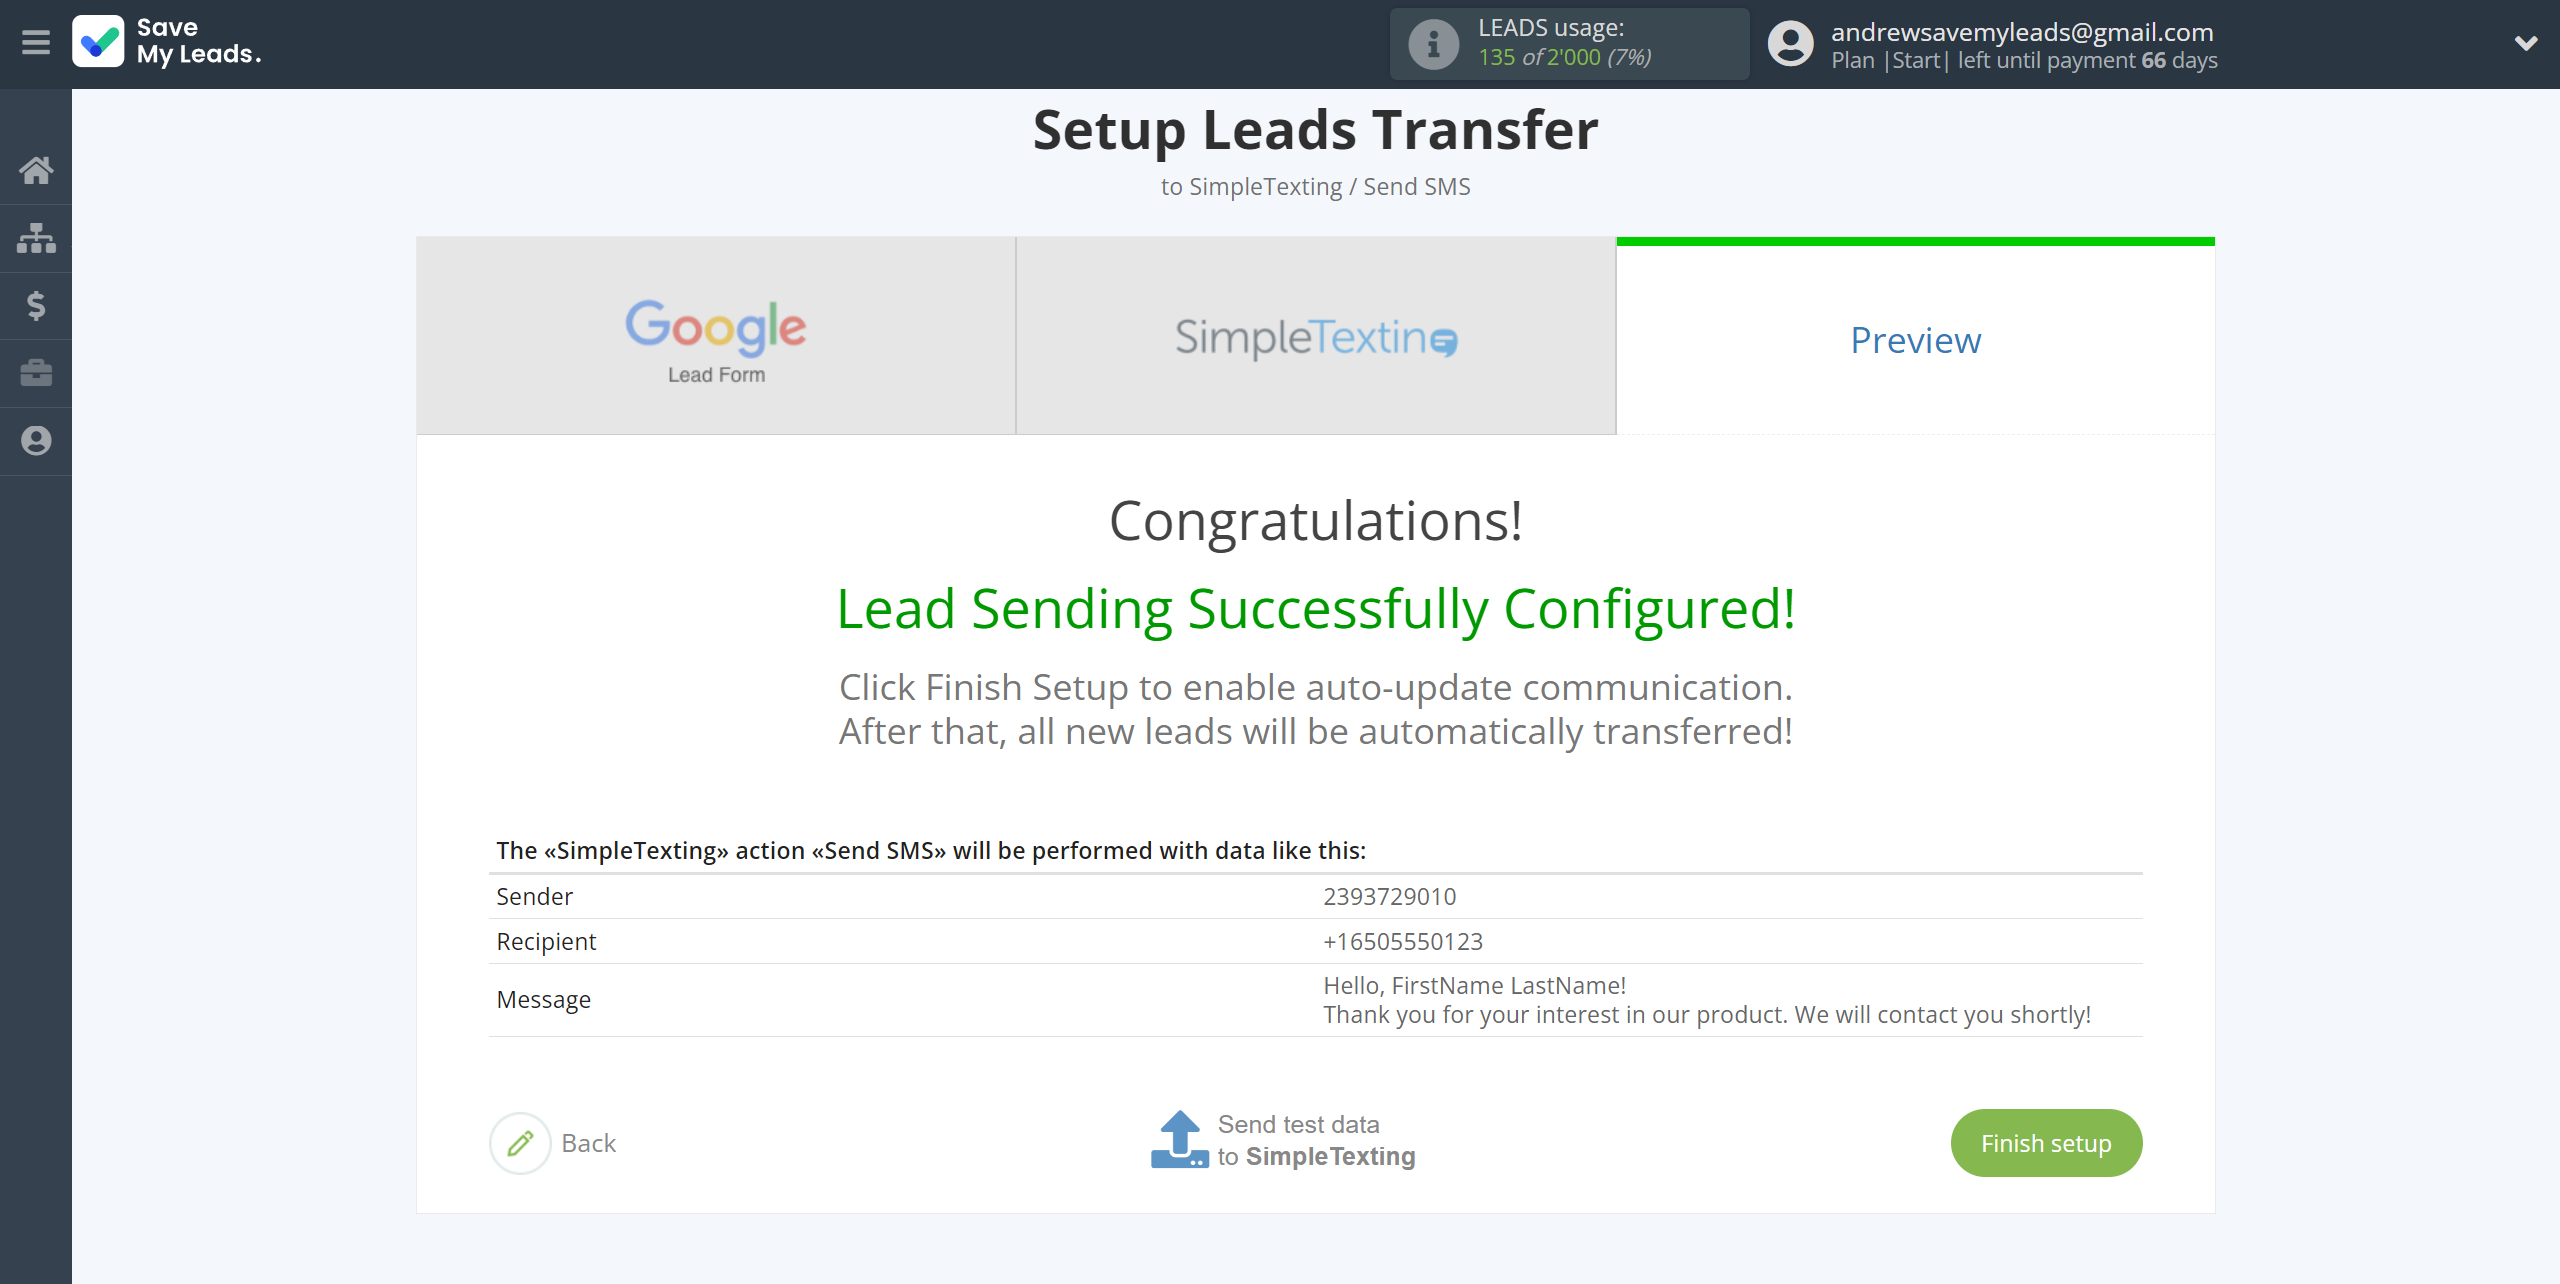 How to Connect Google Lead Form with SimpleTexting | Test data